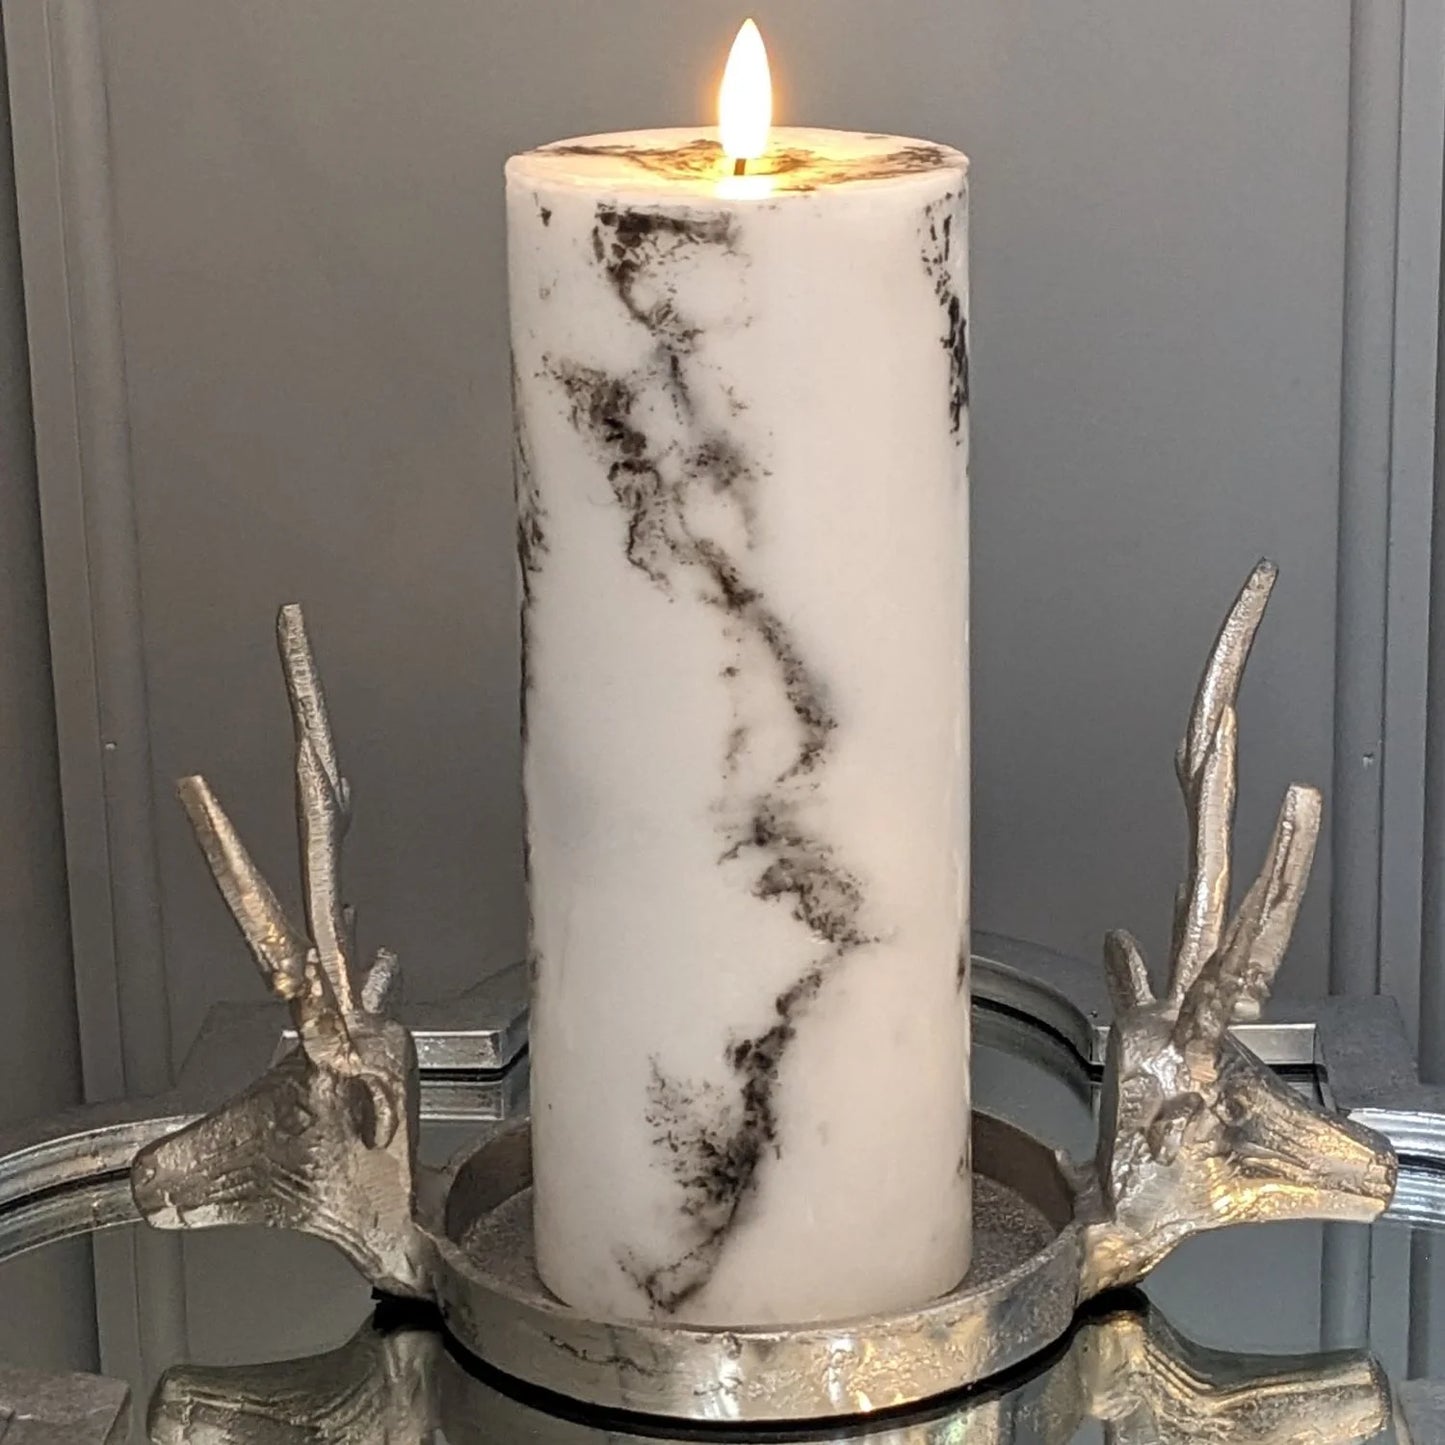 Marble-Effect LED Pillar Candle with Flickering Flame 23x9cm